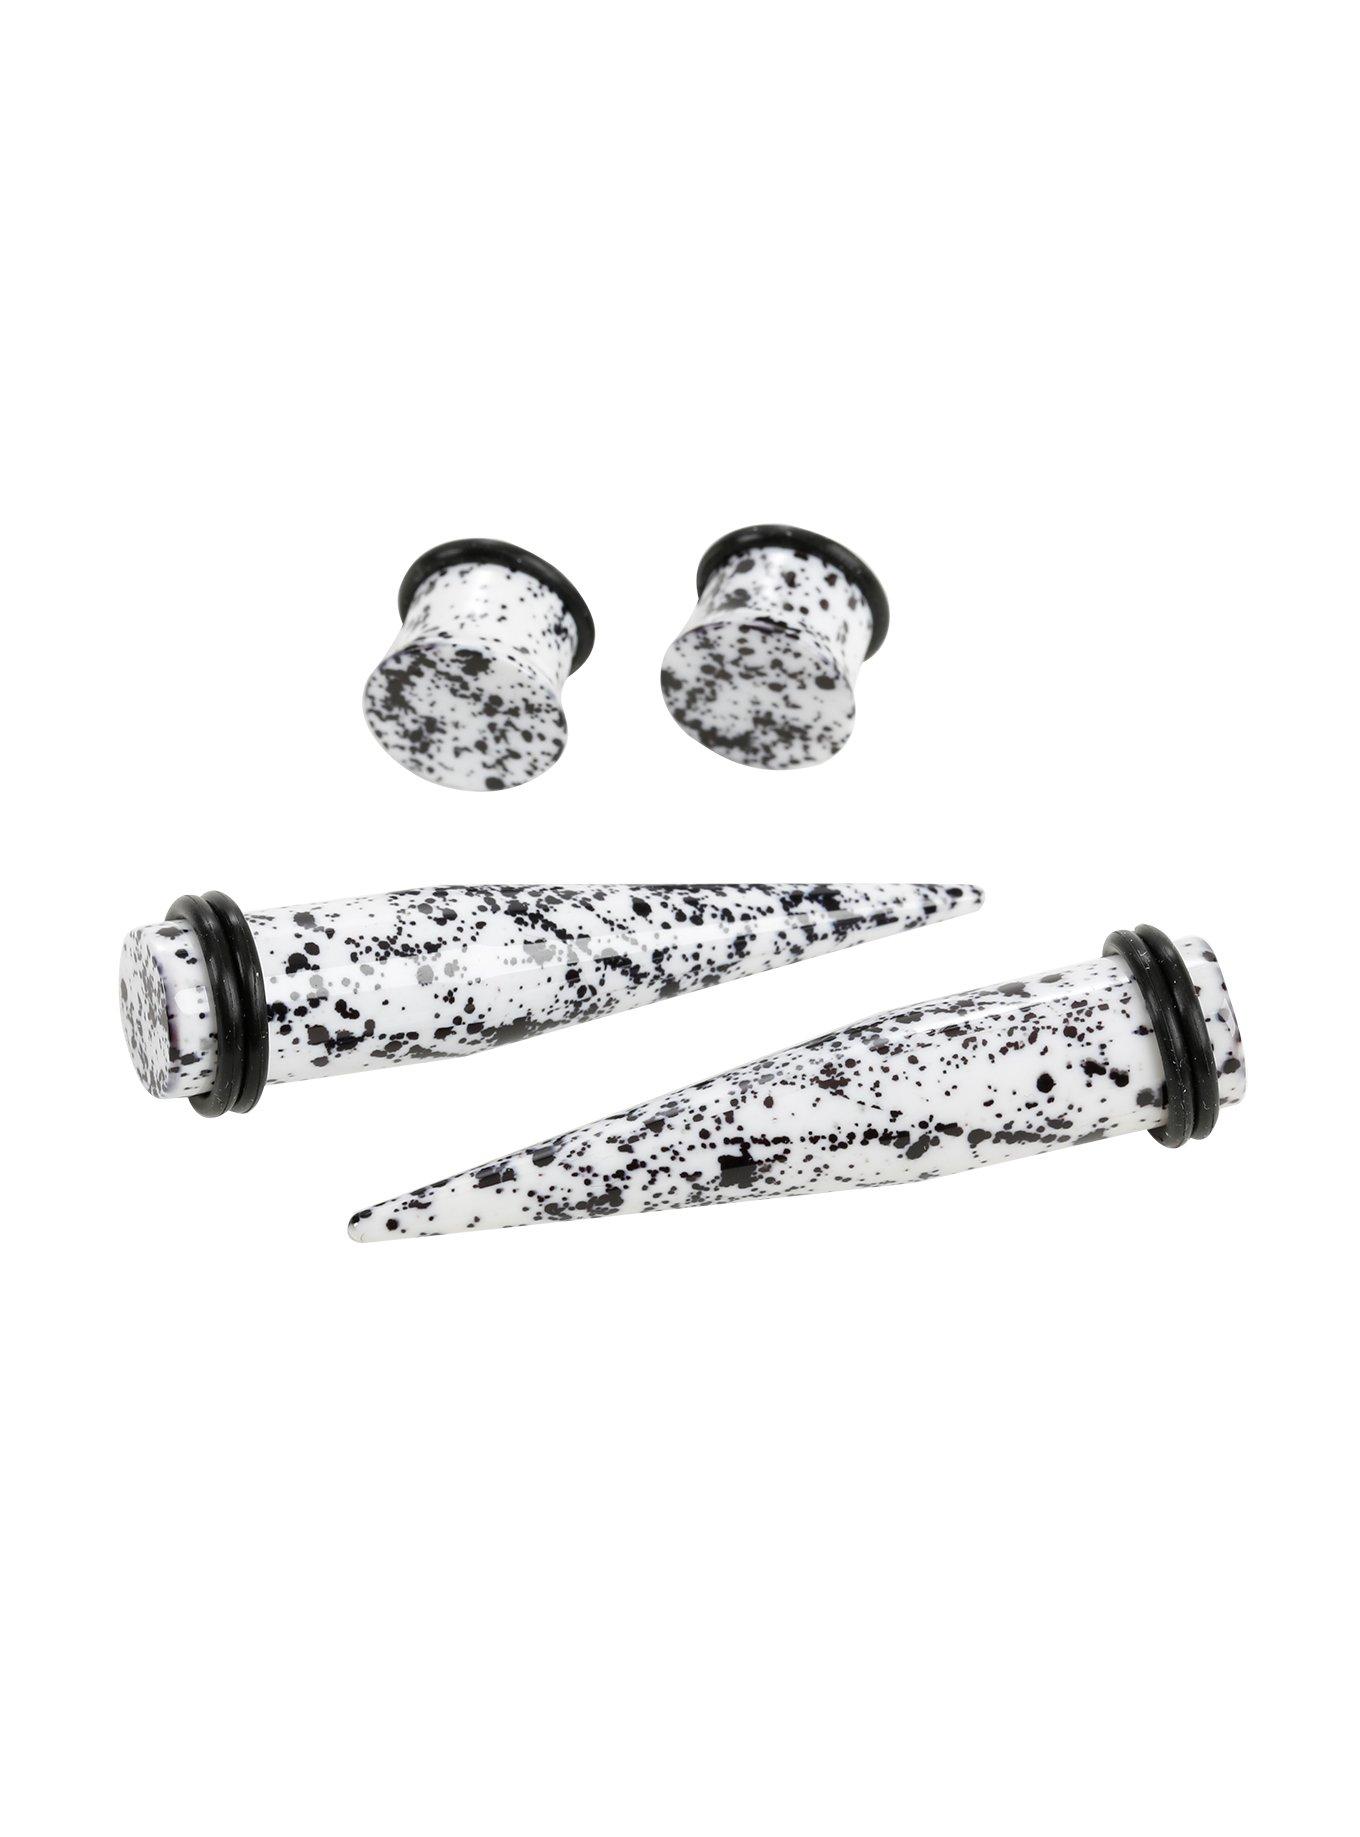 Acrylic White And Black Splatter Taper And Plug 4 Pack, MULTI, hi-res